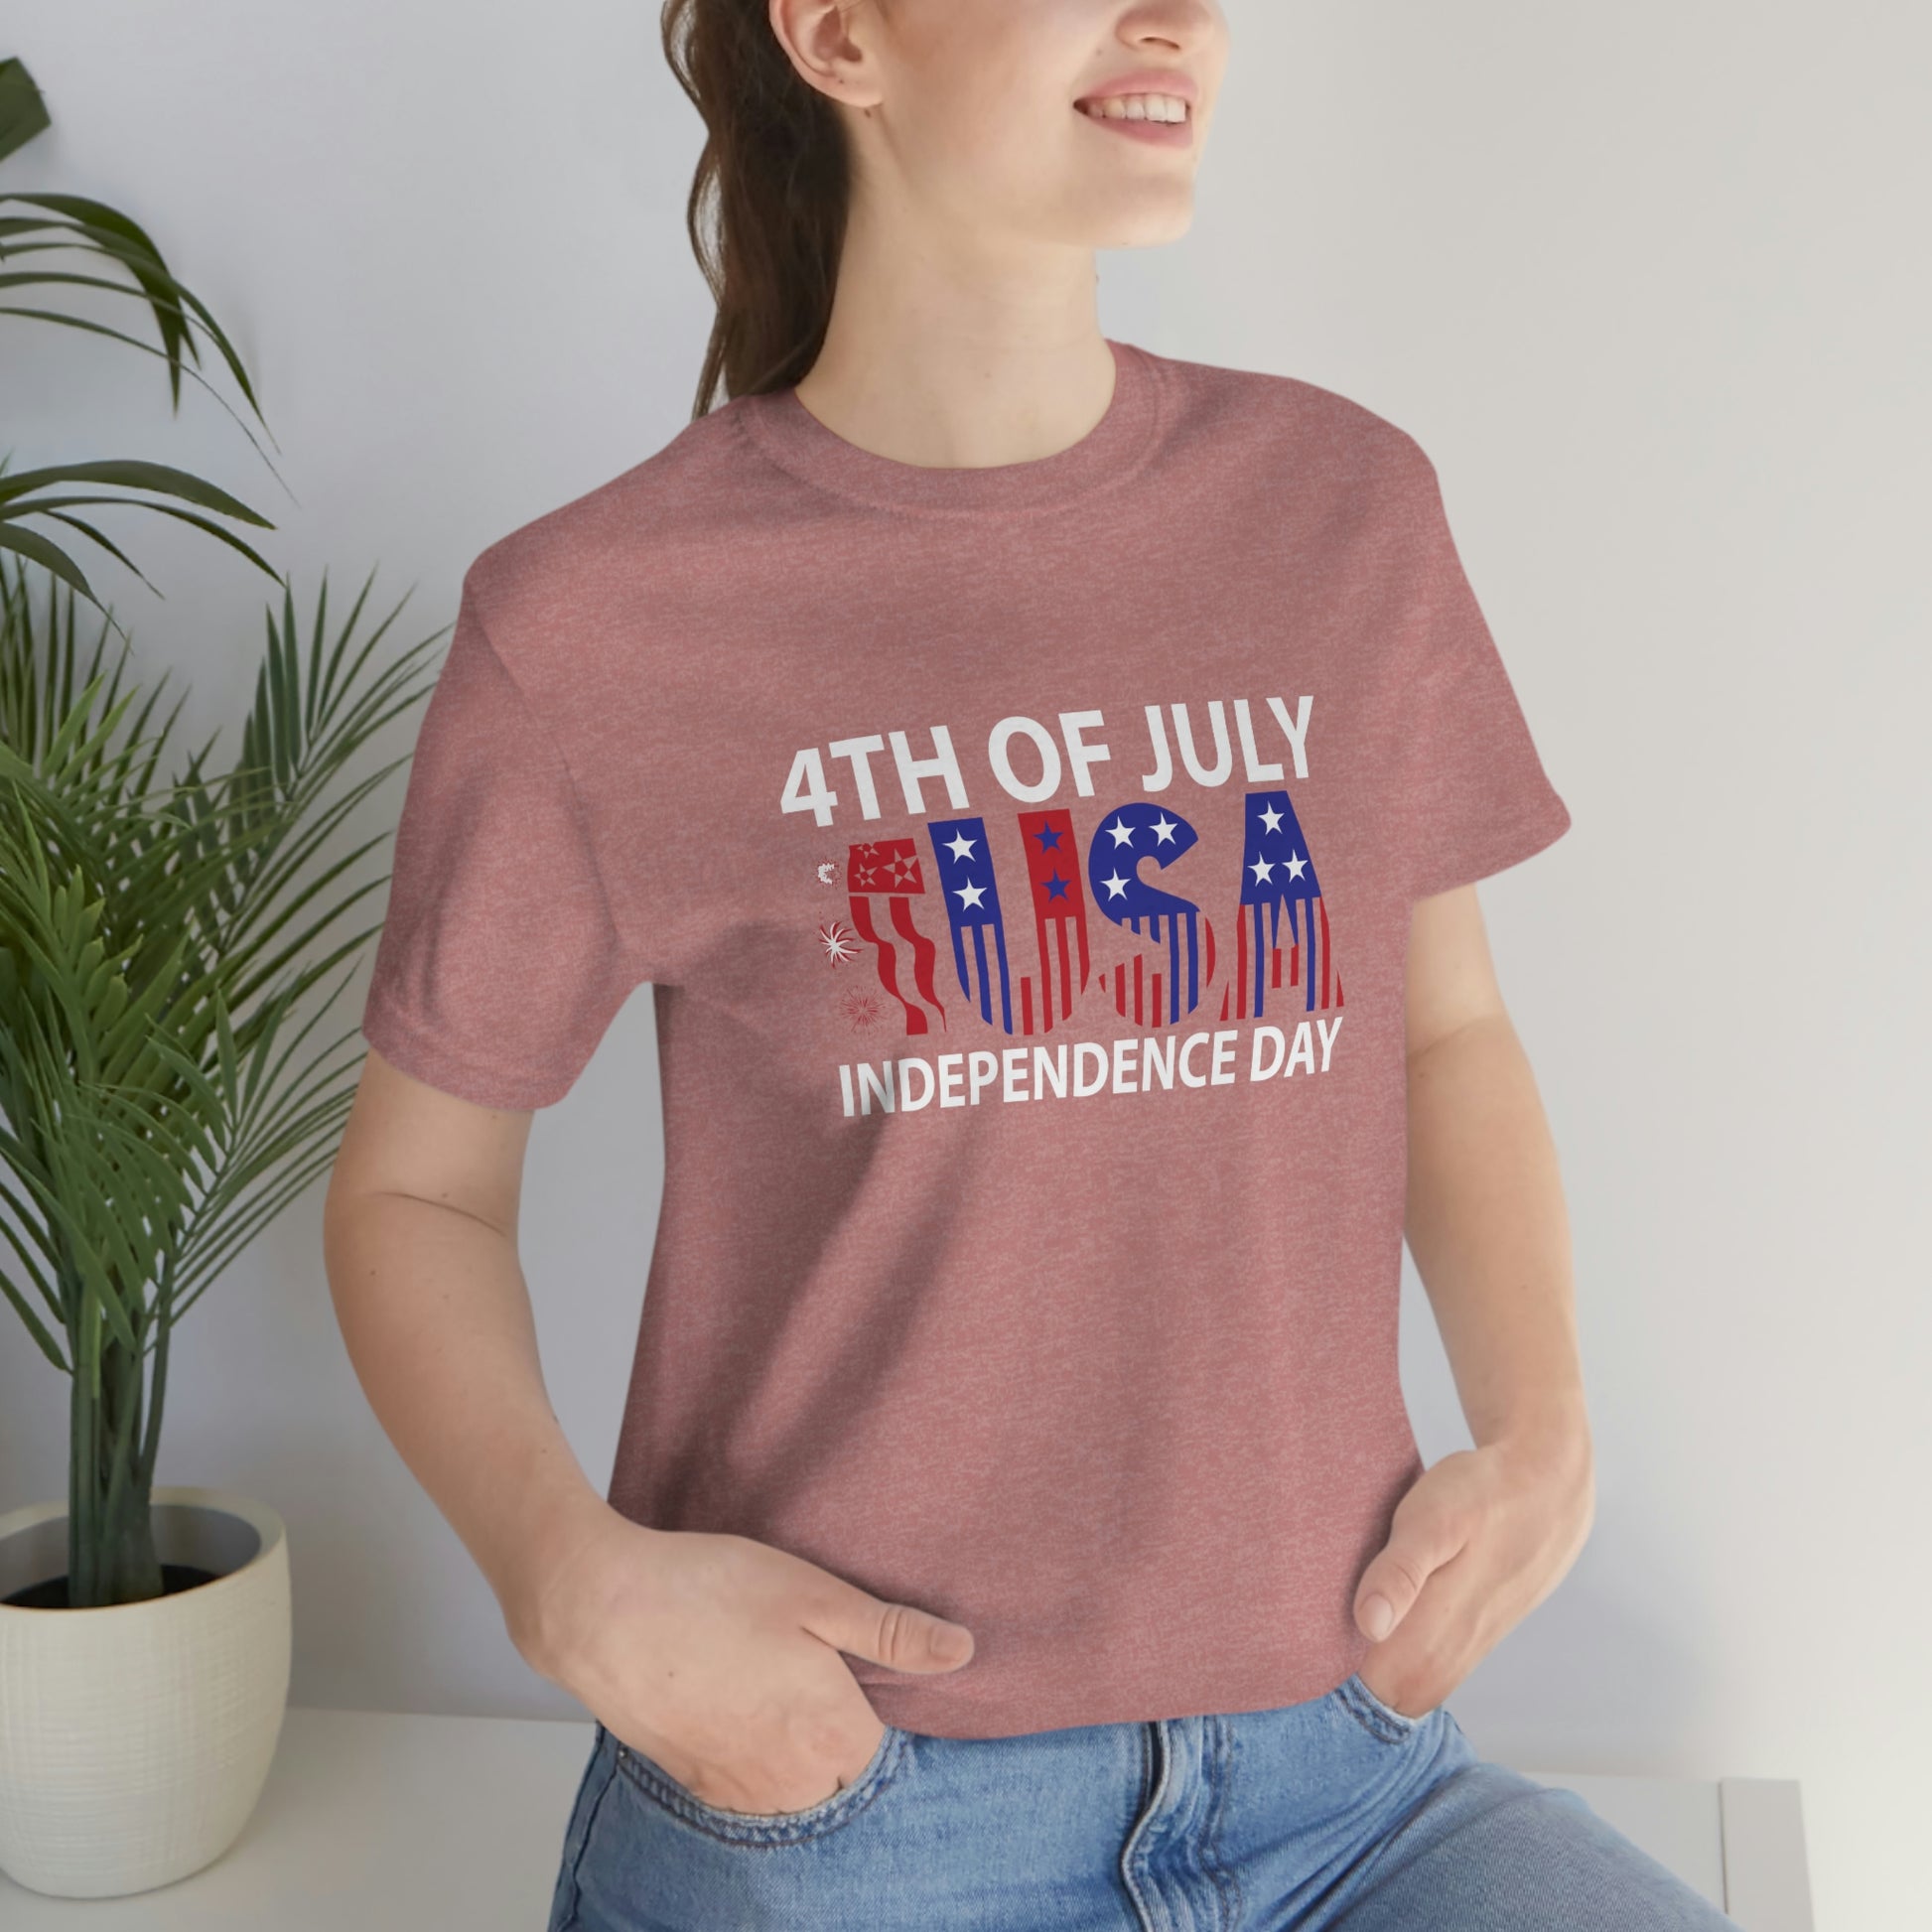 4th of July USA Independence Day Tee tshirt t-shirt